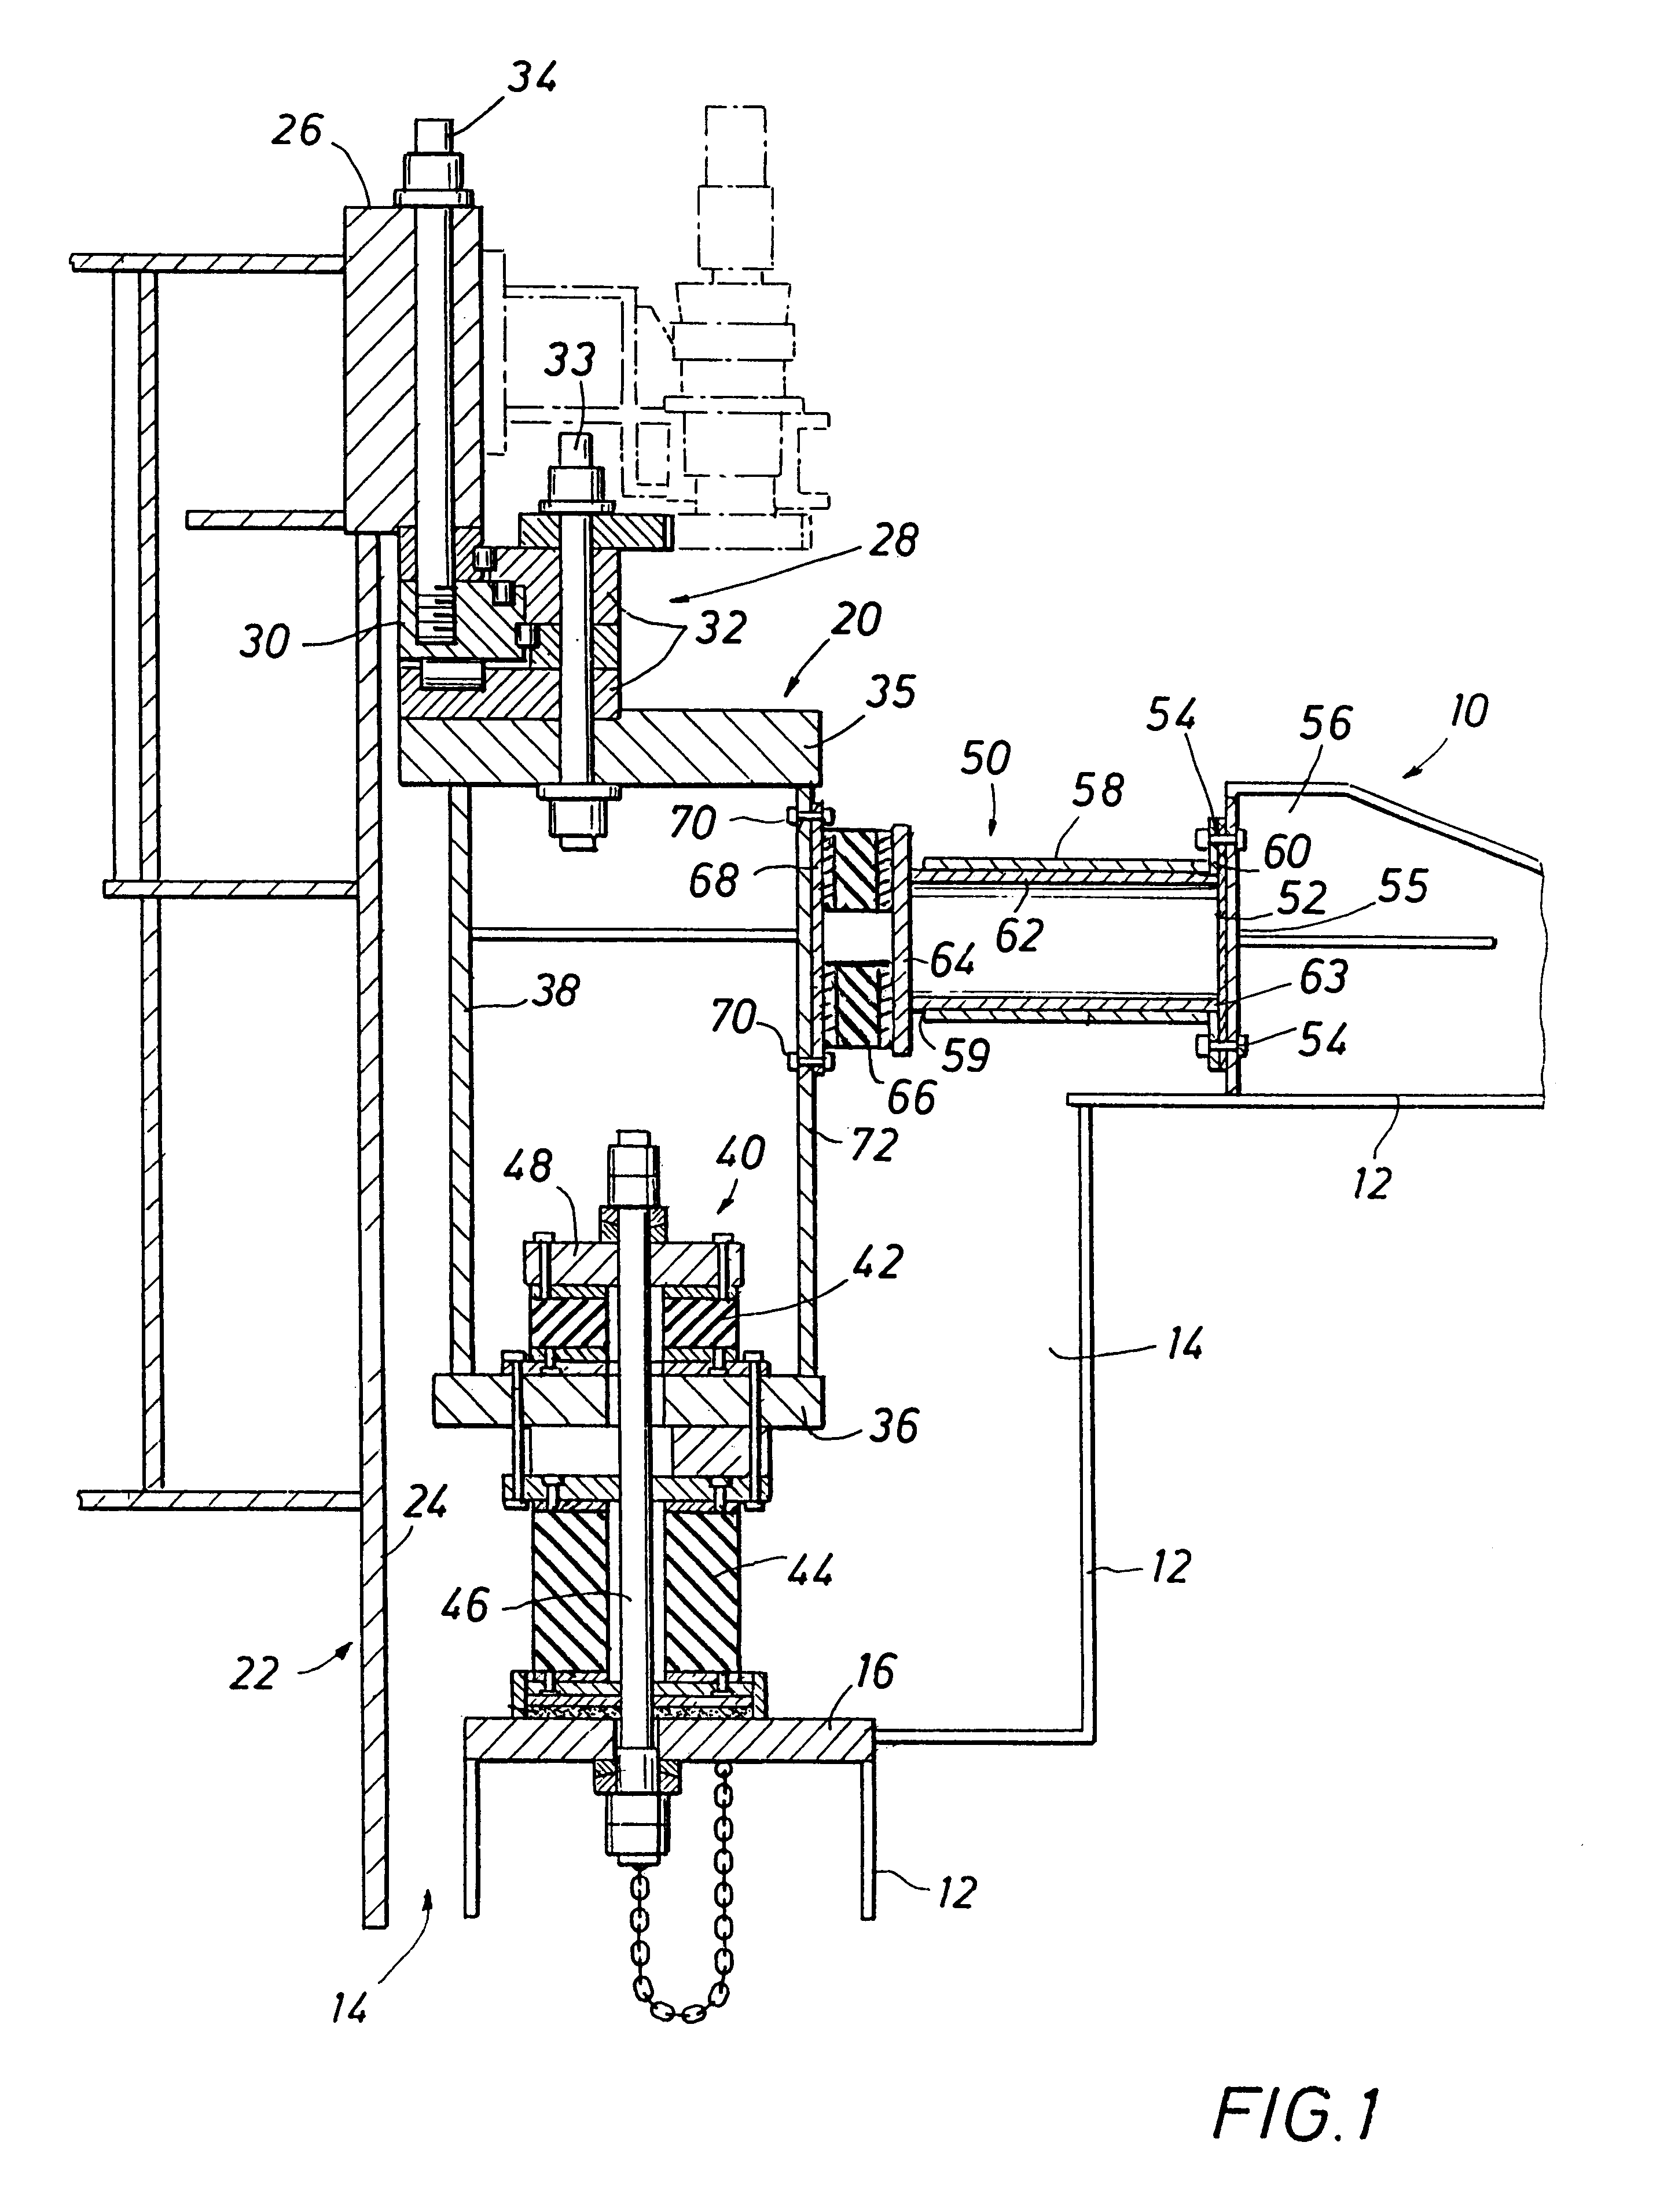 Radial elastomeric spring arrangement to compensate for hull deflection at main bearing of a mooring turret